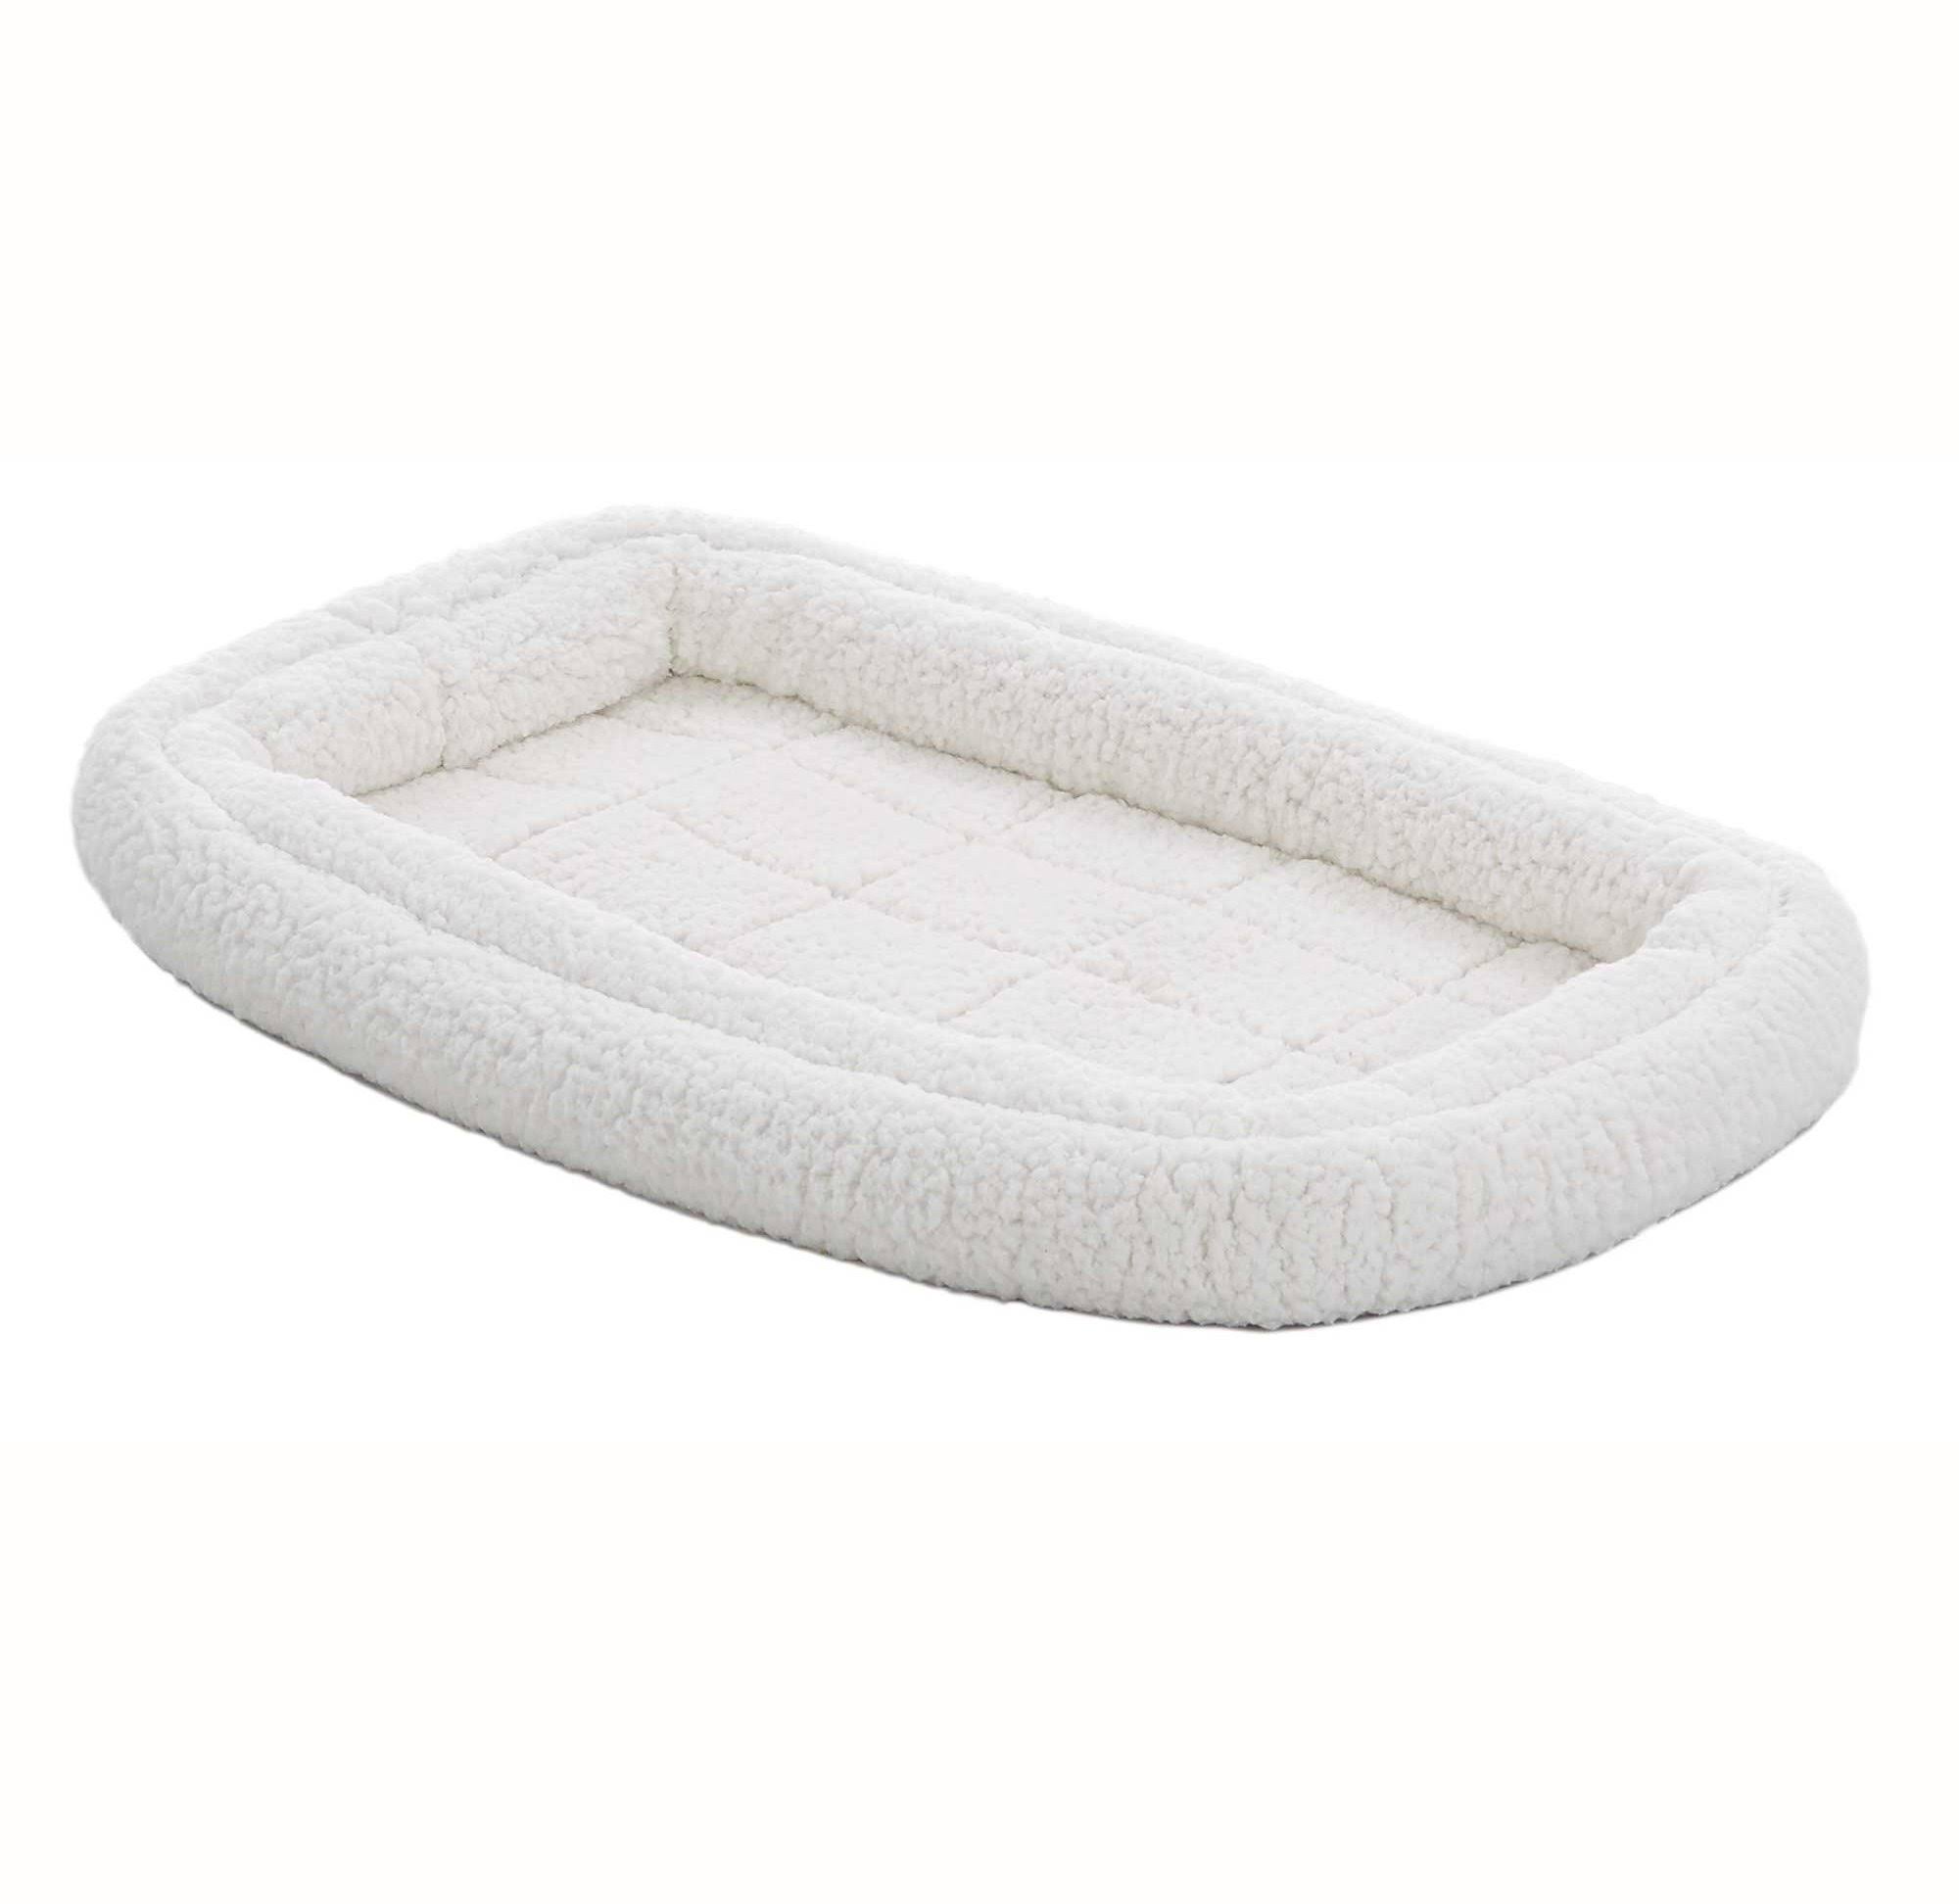 MidWest Quiet Time Deluxe Toy Double Bolster Dog Bed - White, 42"